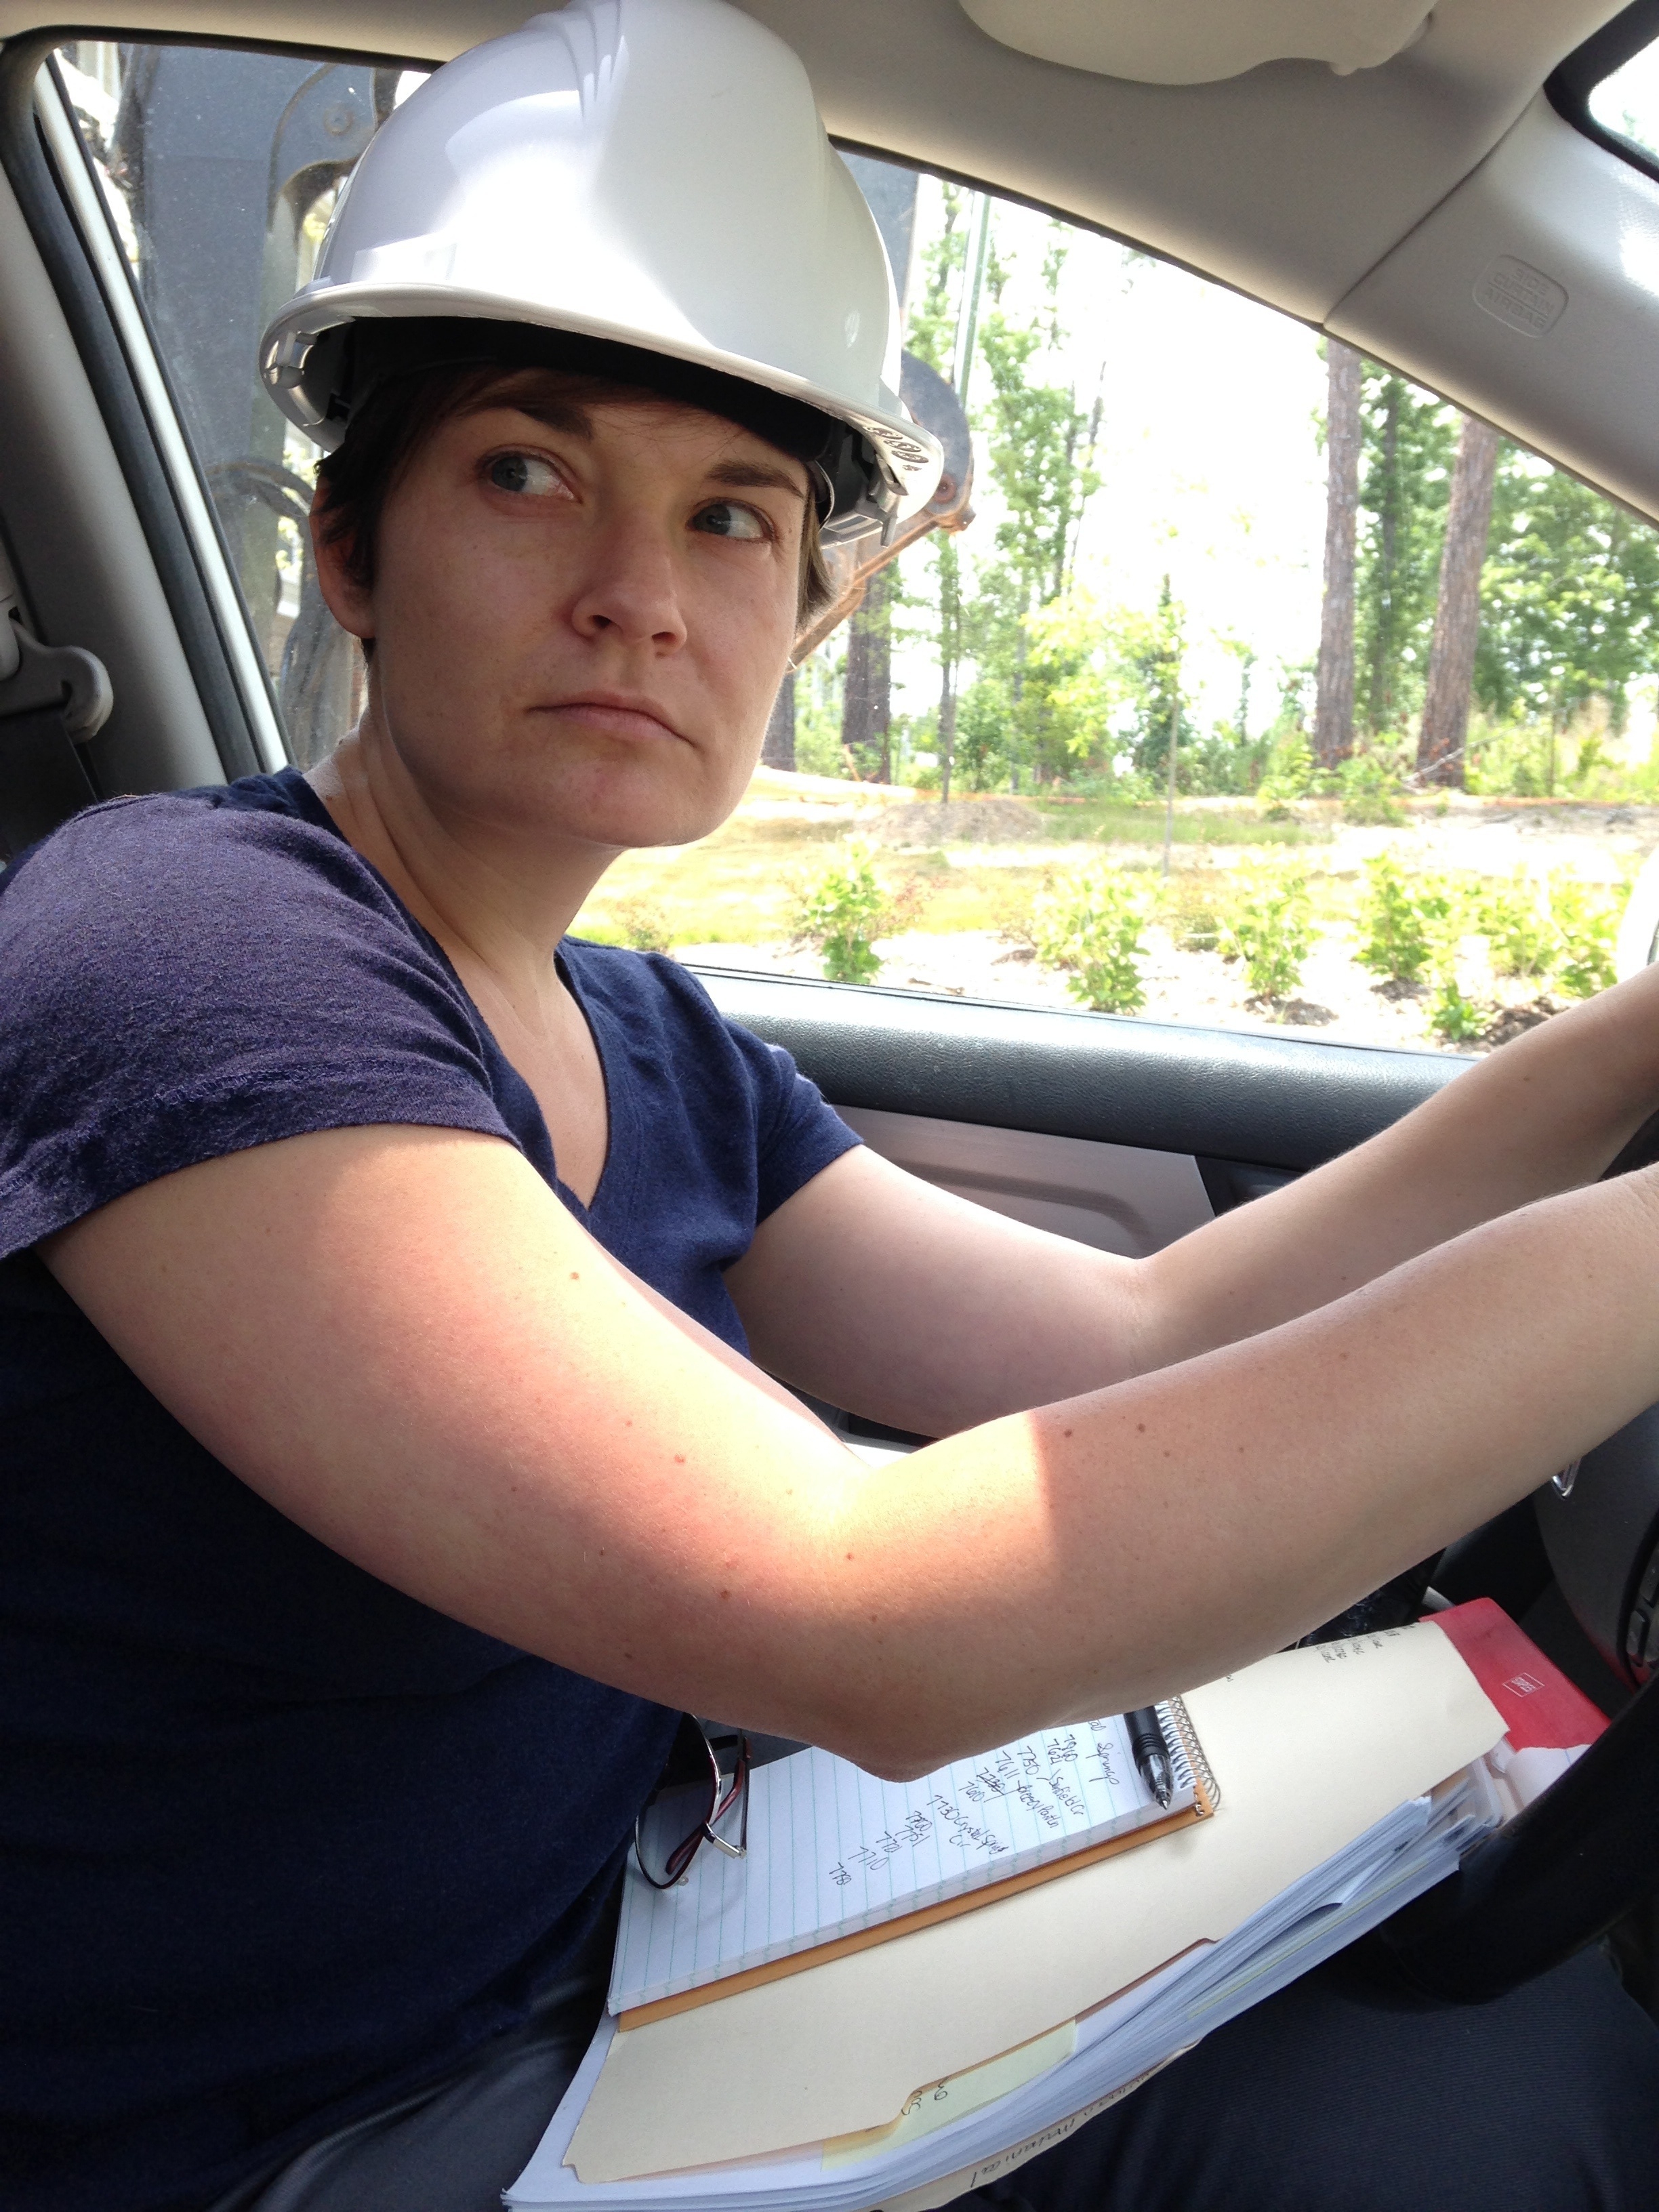  Mandy  visiting a construction site while reporting on worker misclassification in summer 2014.&nbsp;  